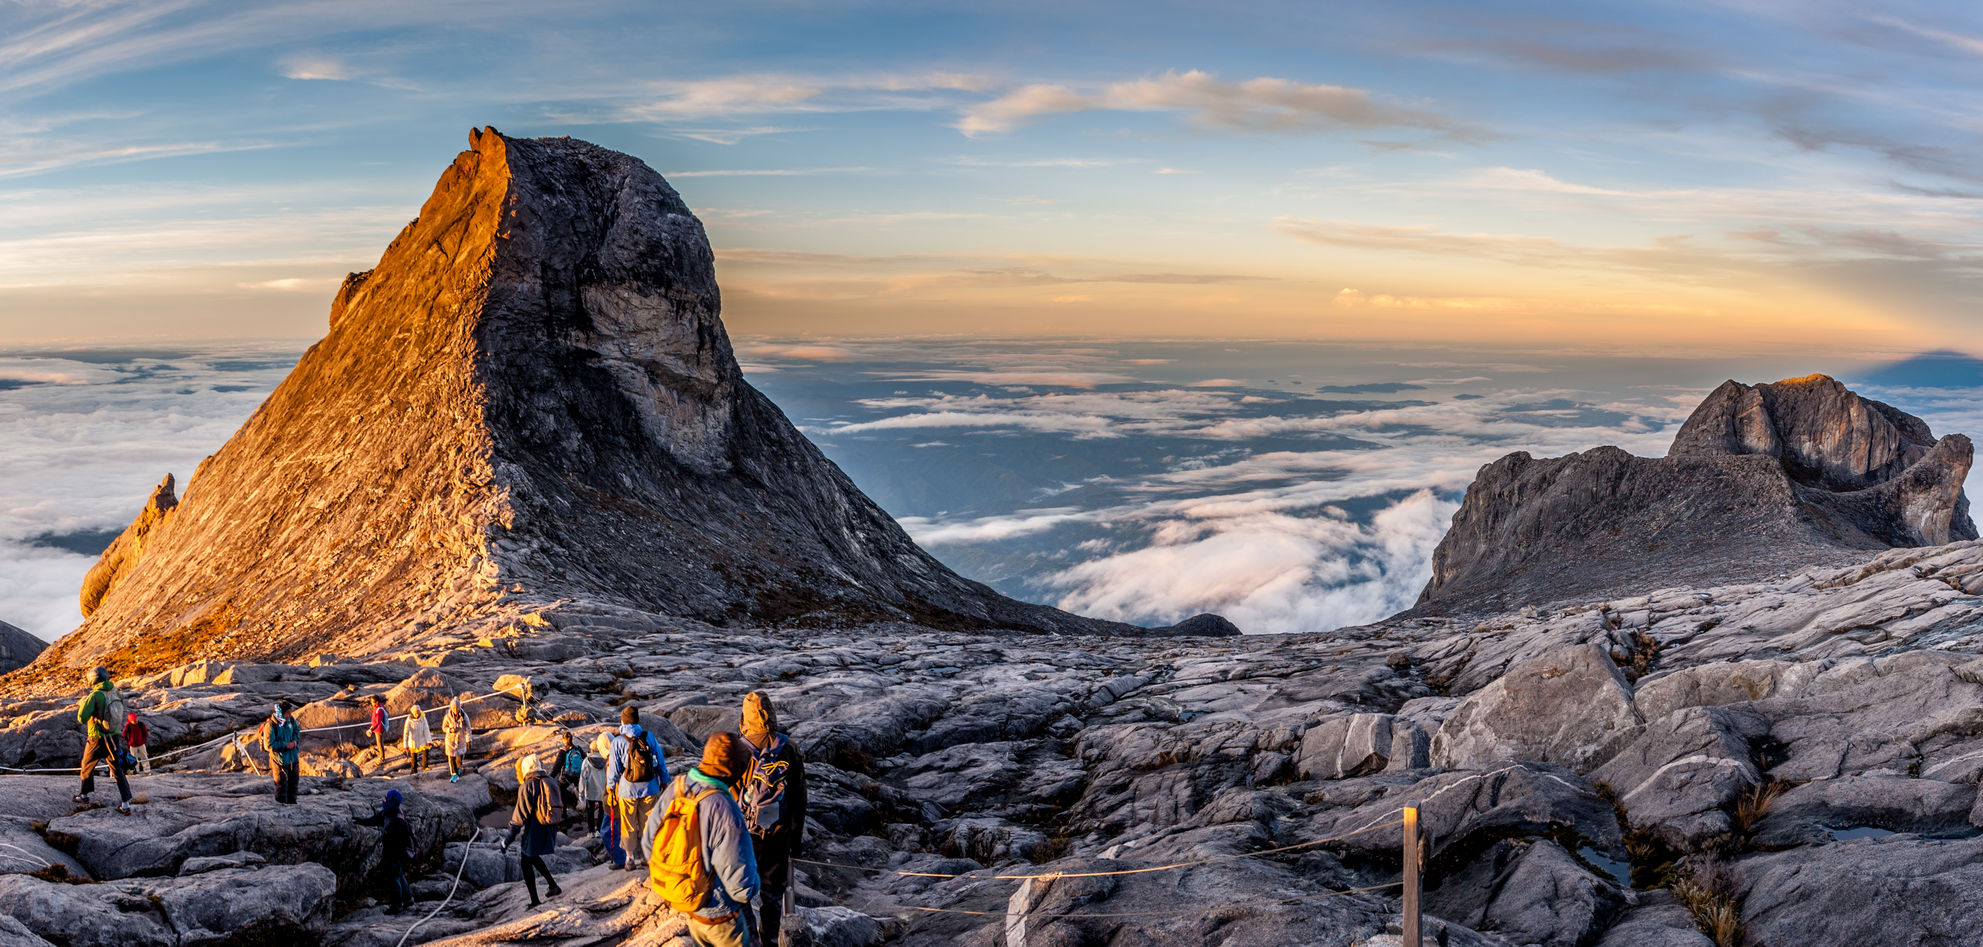 The sun beginning to rise over Mount Kinabalu the highest 